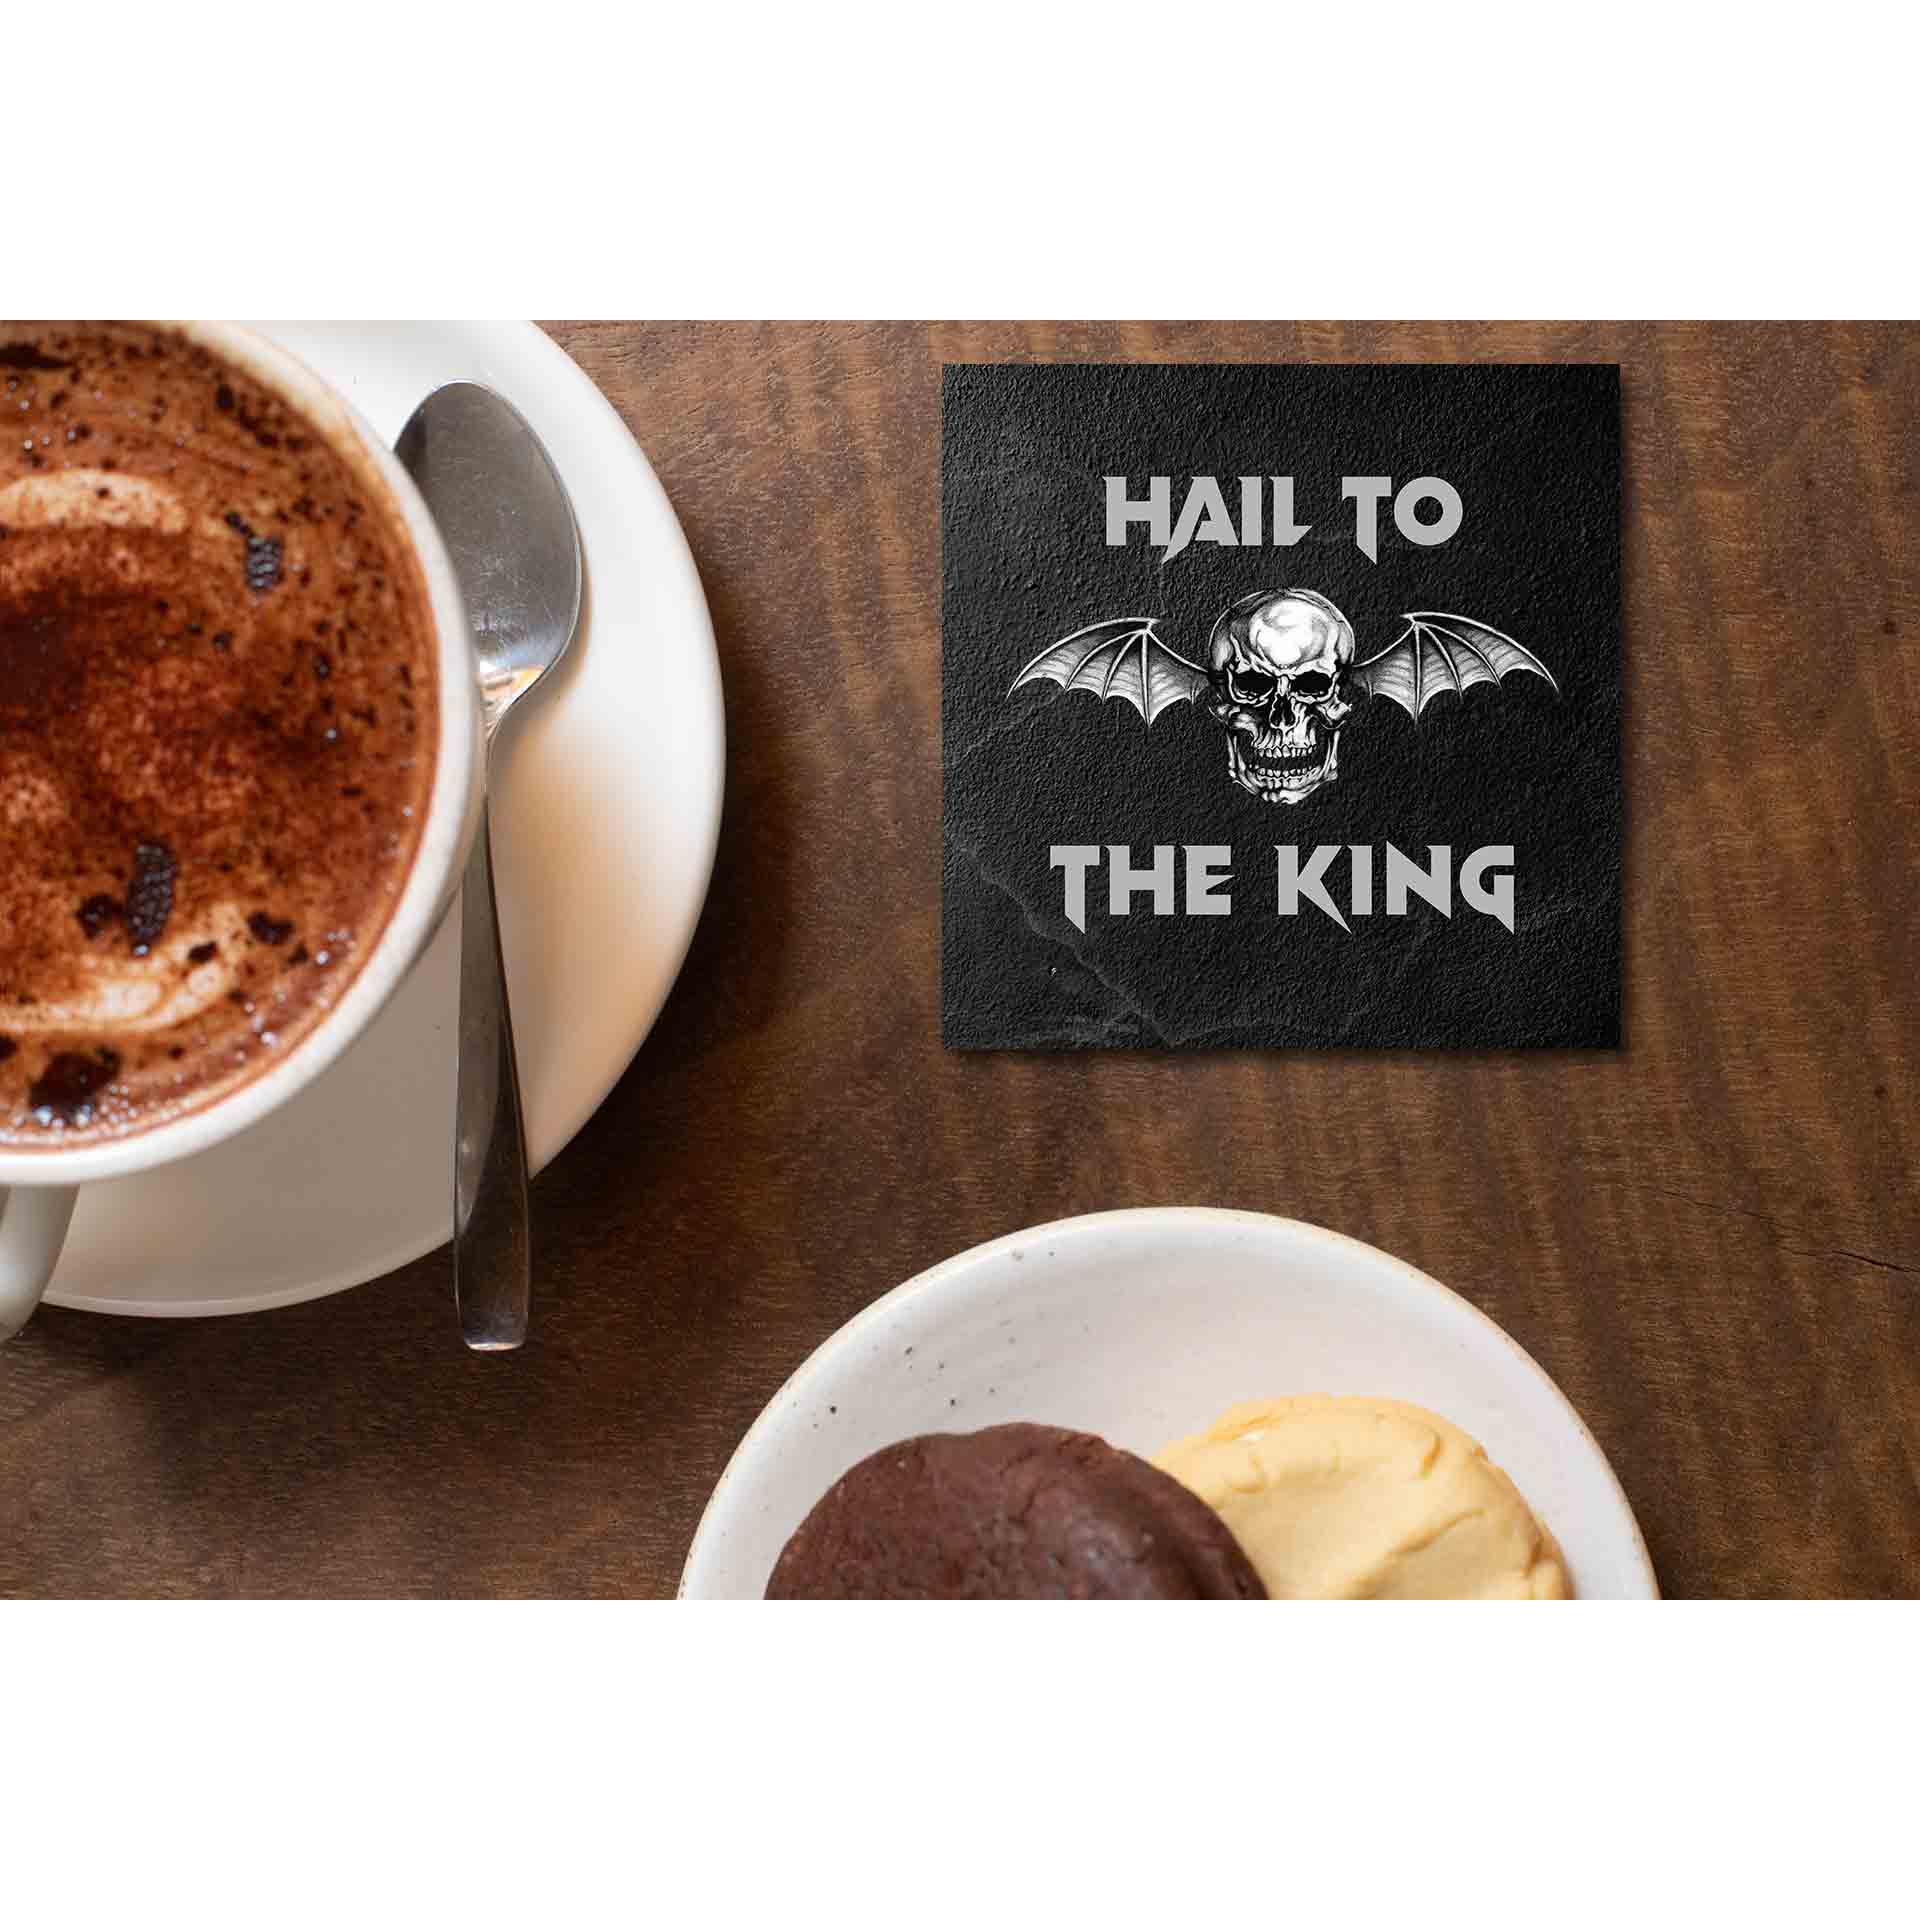 avenged sevenfold hail to the king coasters wooden table cups indian music band buy online india the banyan tee tbt men women girls boys unisex